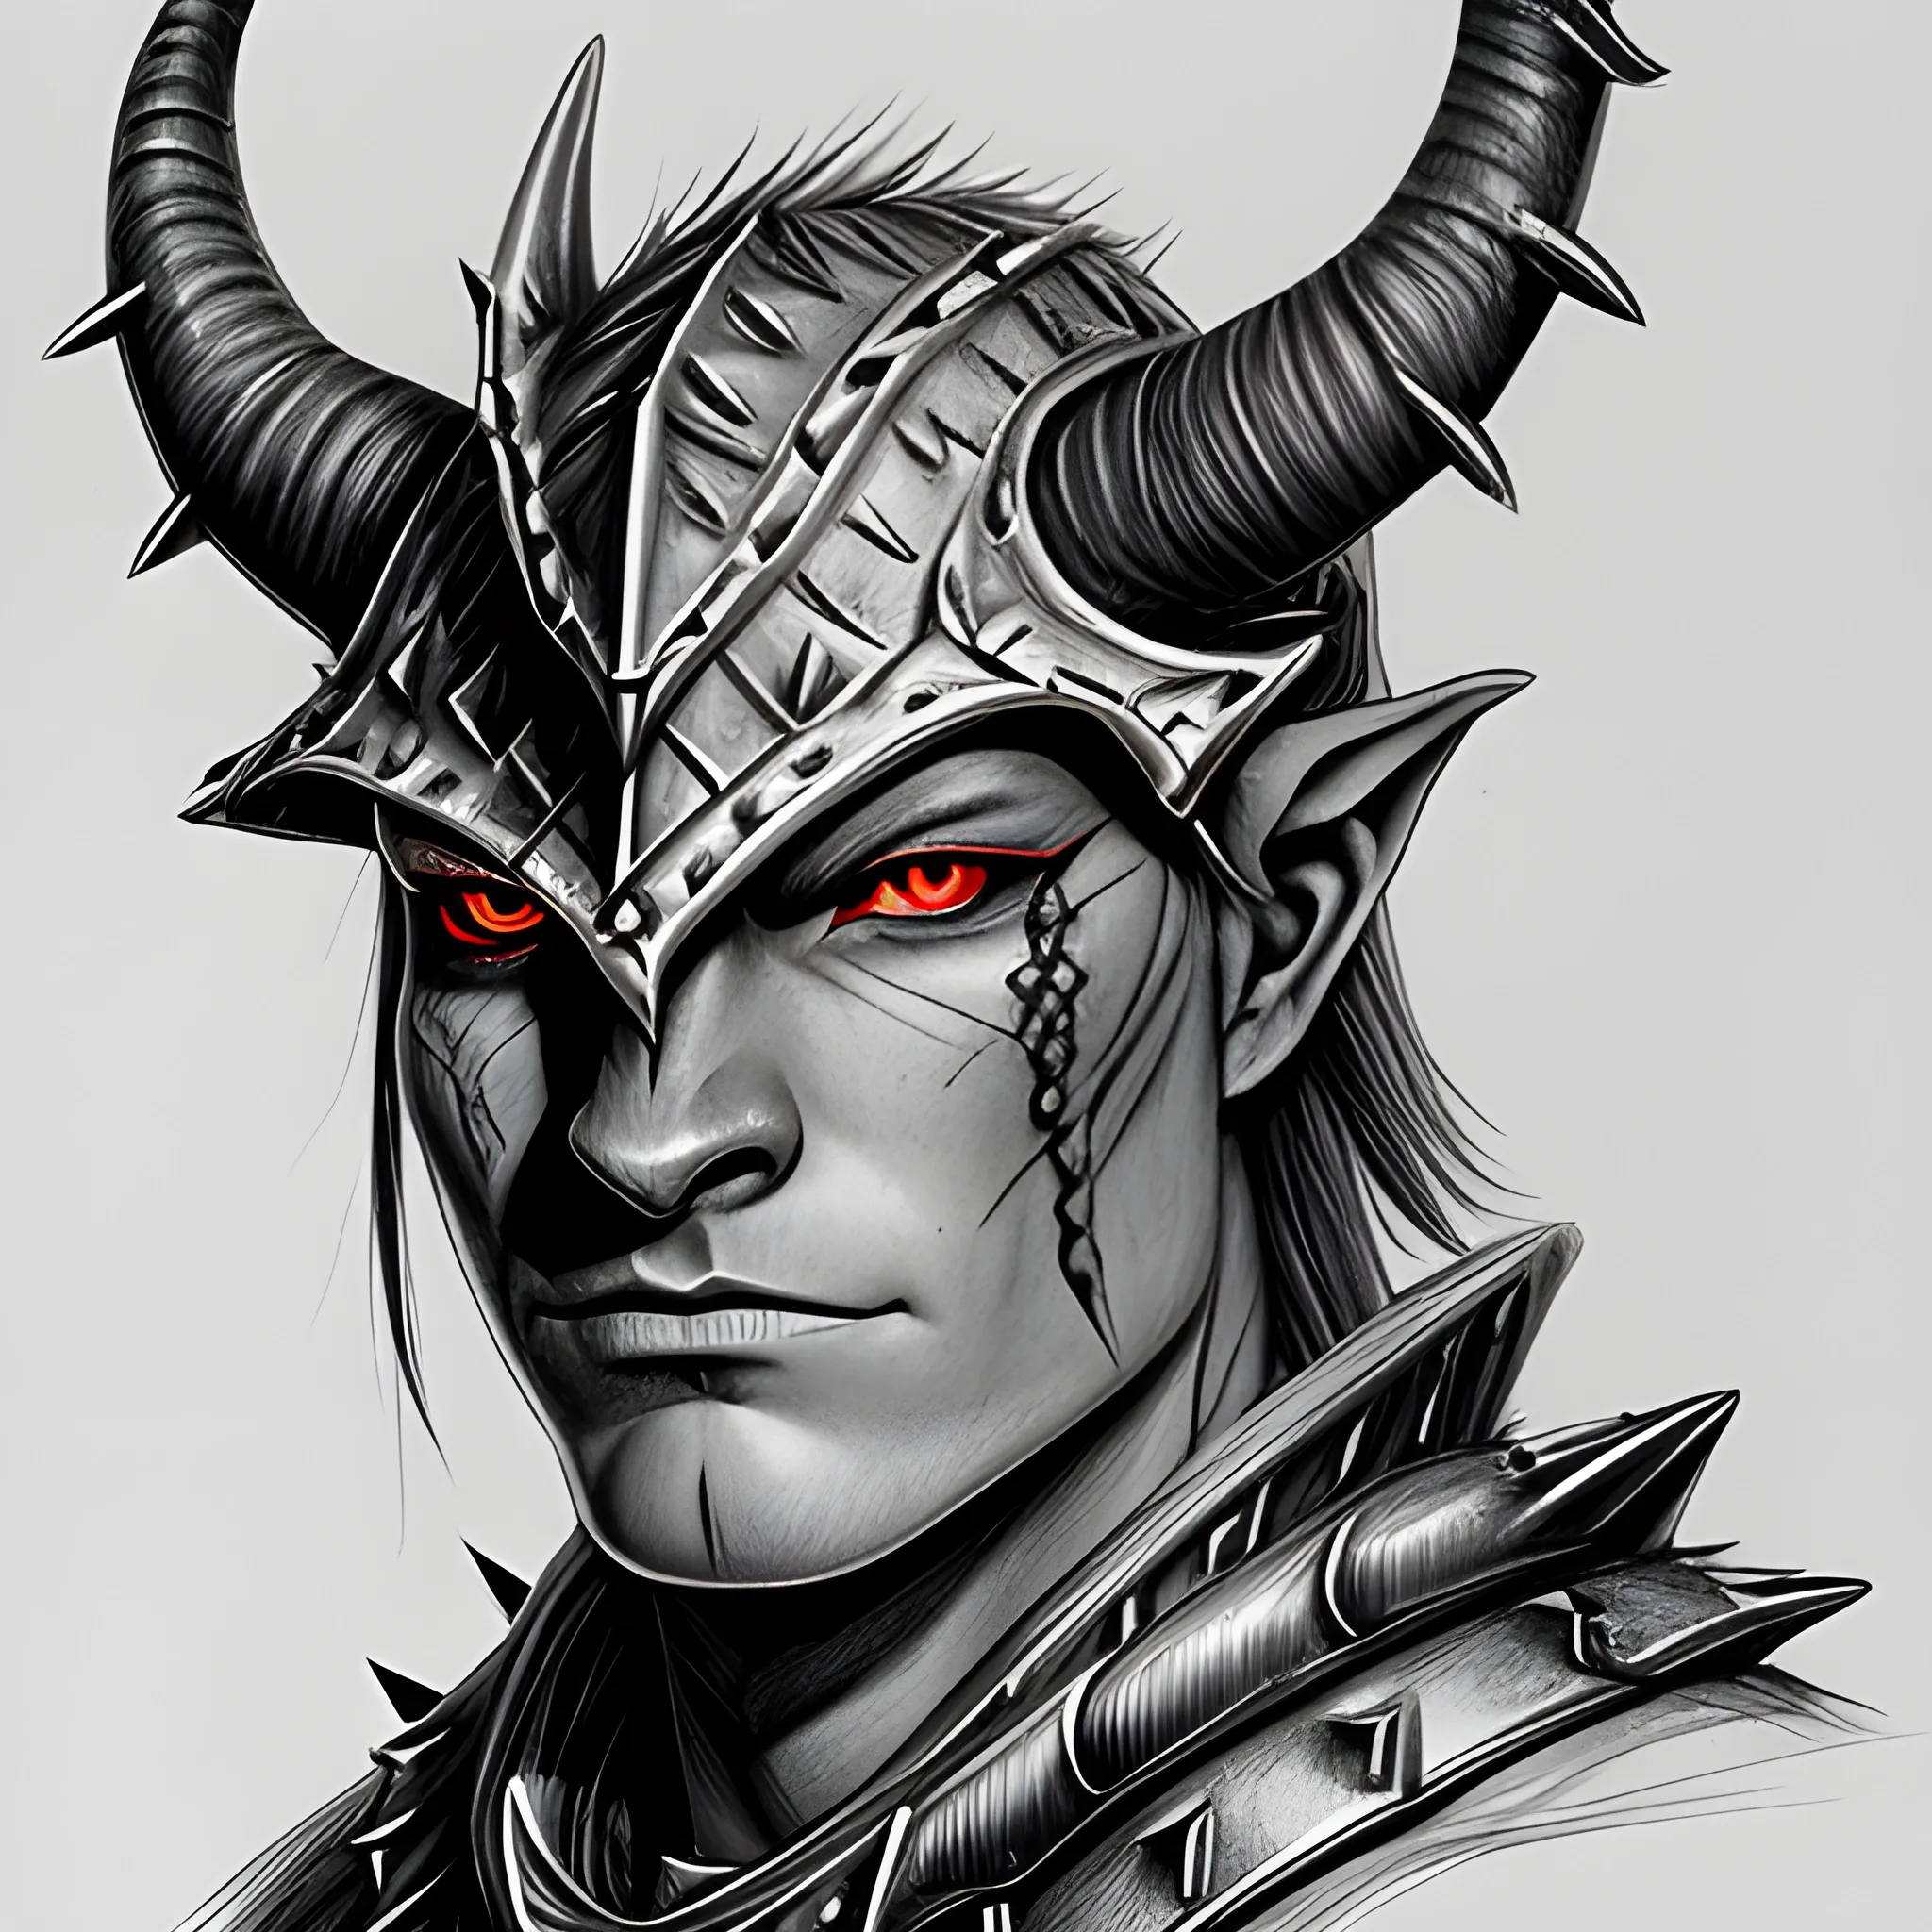 red skin, blue eyes,dragonborn,paladin,6'1, spiked horns, dnd  artstyle, Pencil Sketch